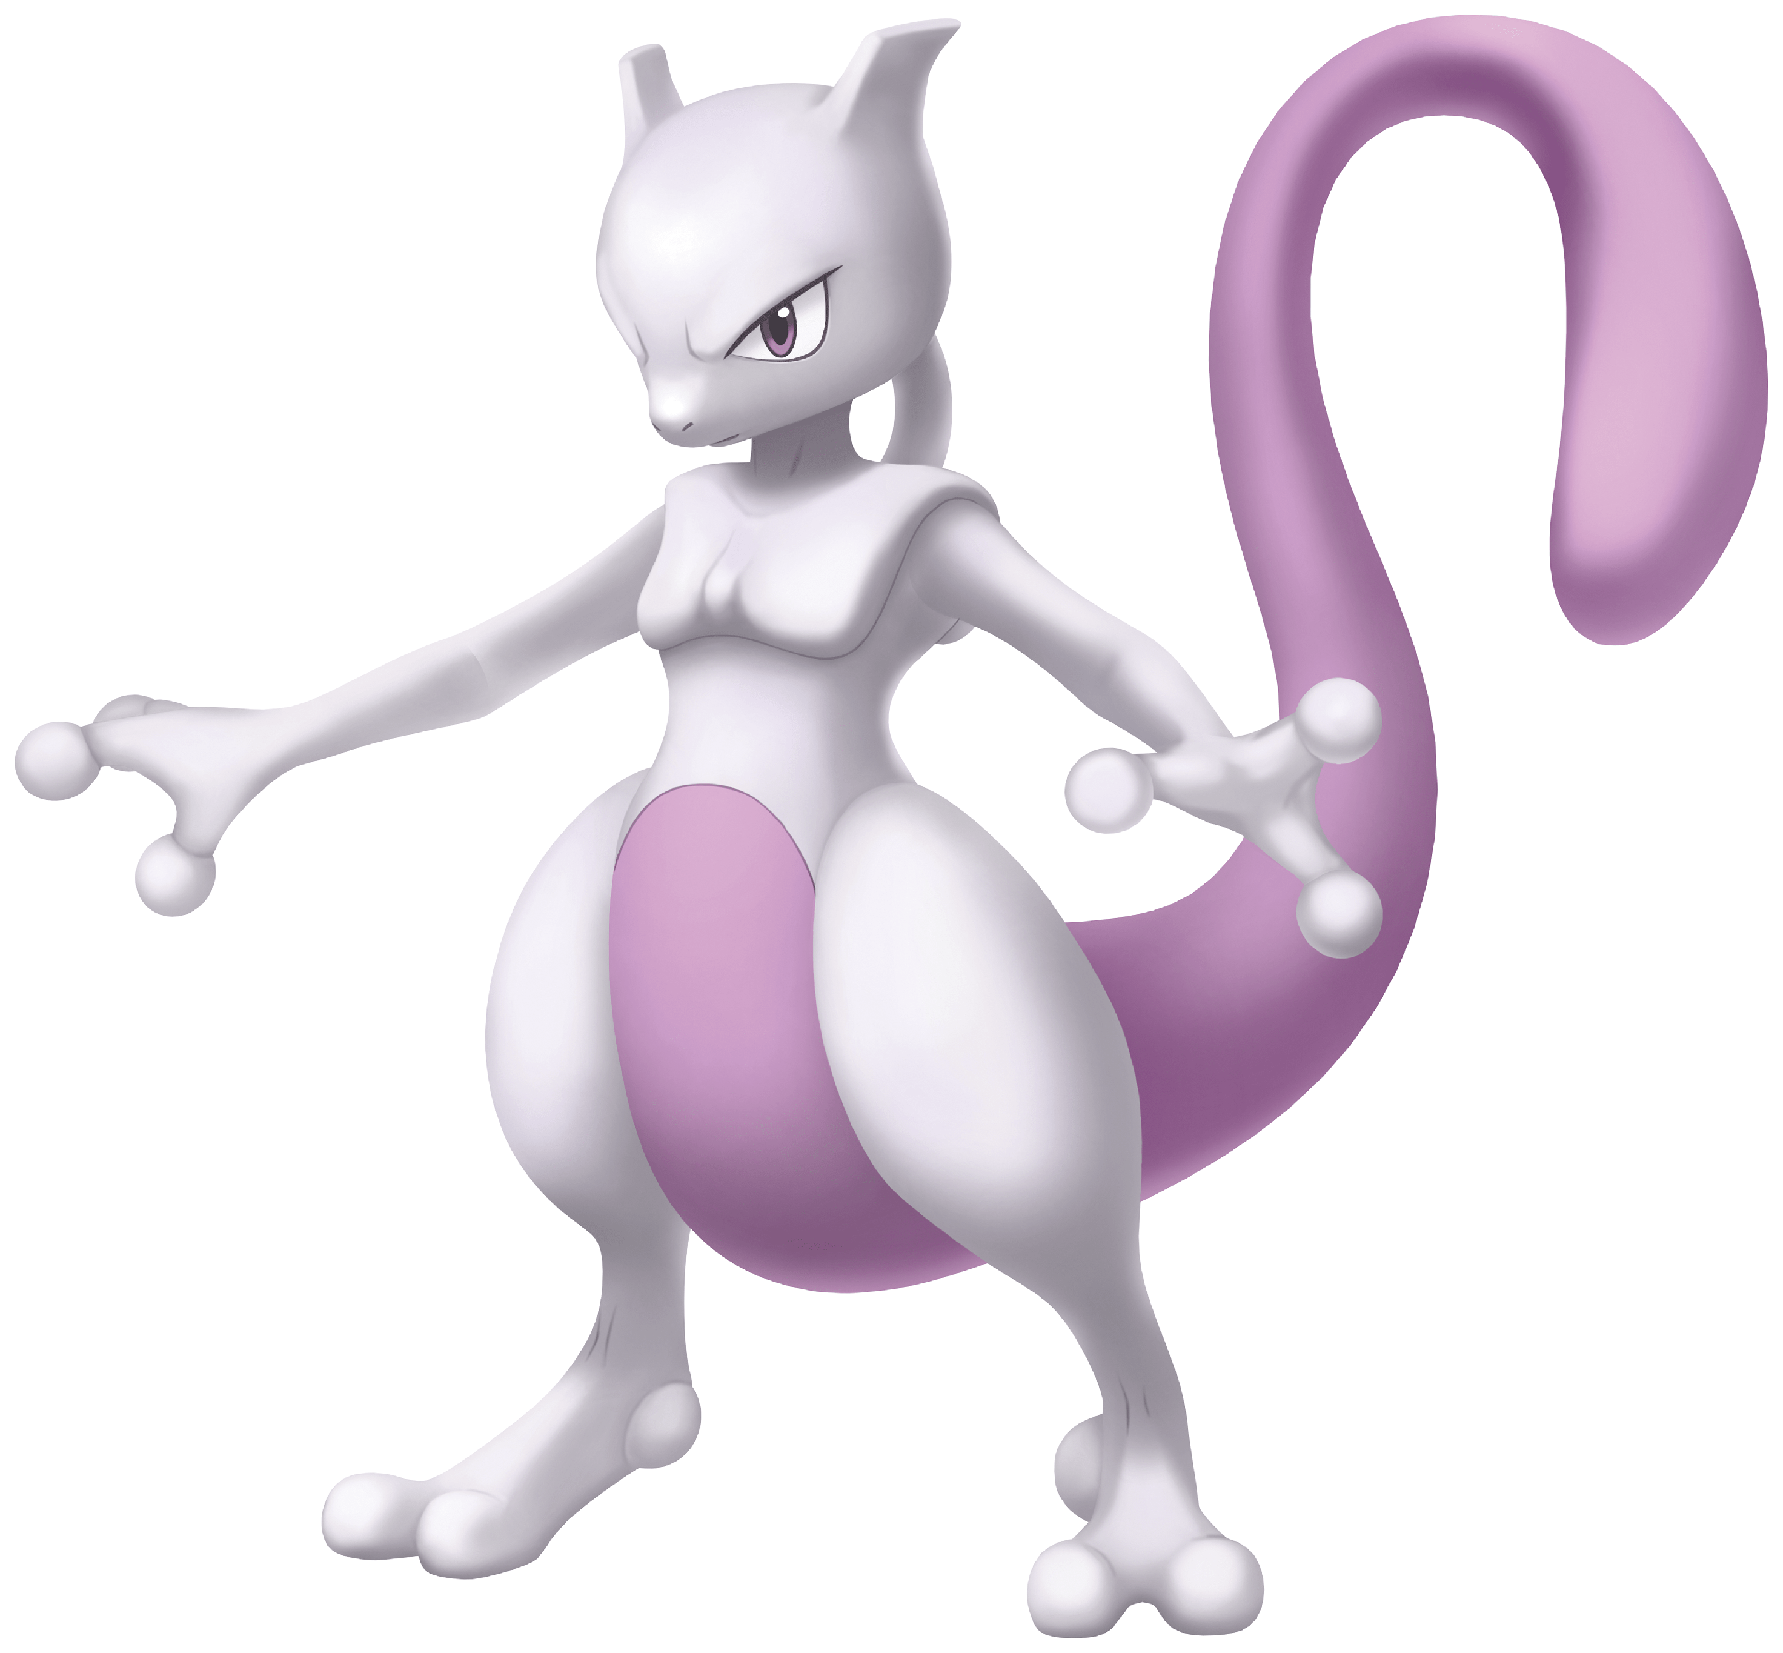 Mewtwo, Character Profile Wikia